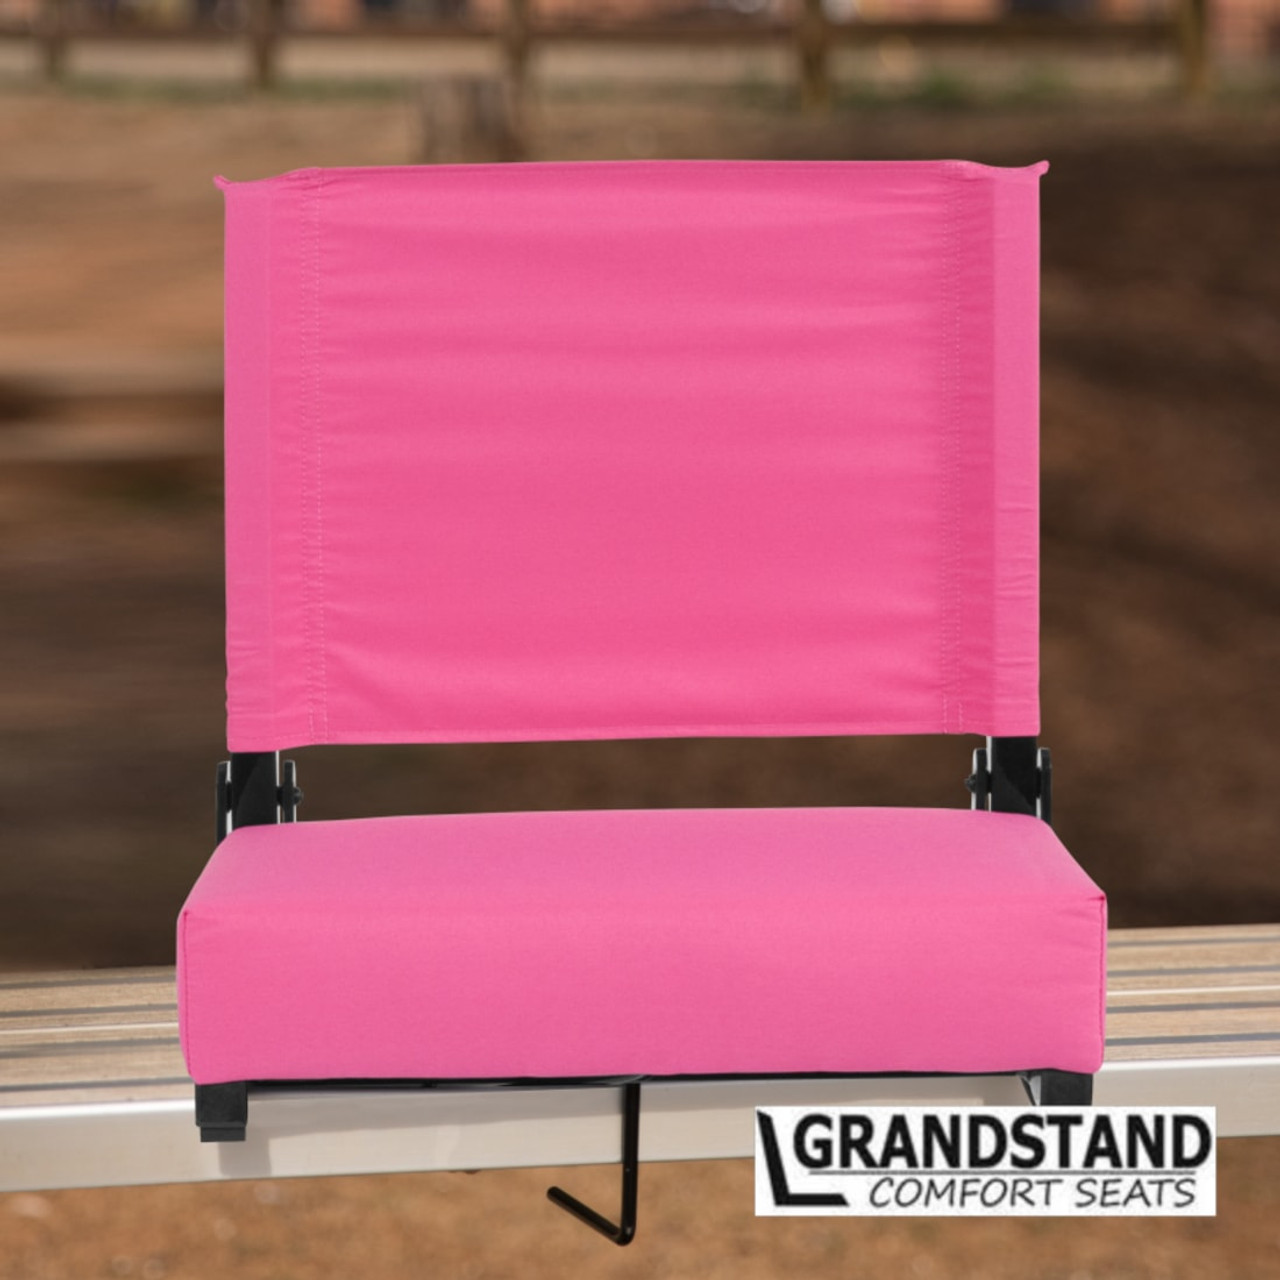 Grandstand Comfort Seats by Flash - 500 lb. Rated Lightweight Stadium Chair with Handle & Ultra-Padded Seat, Pink